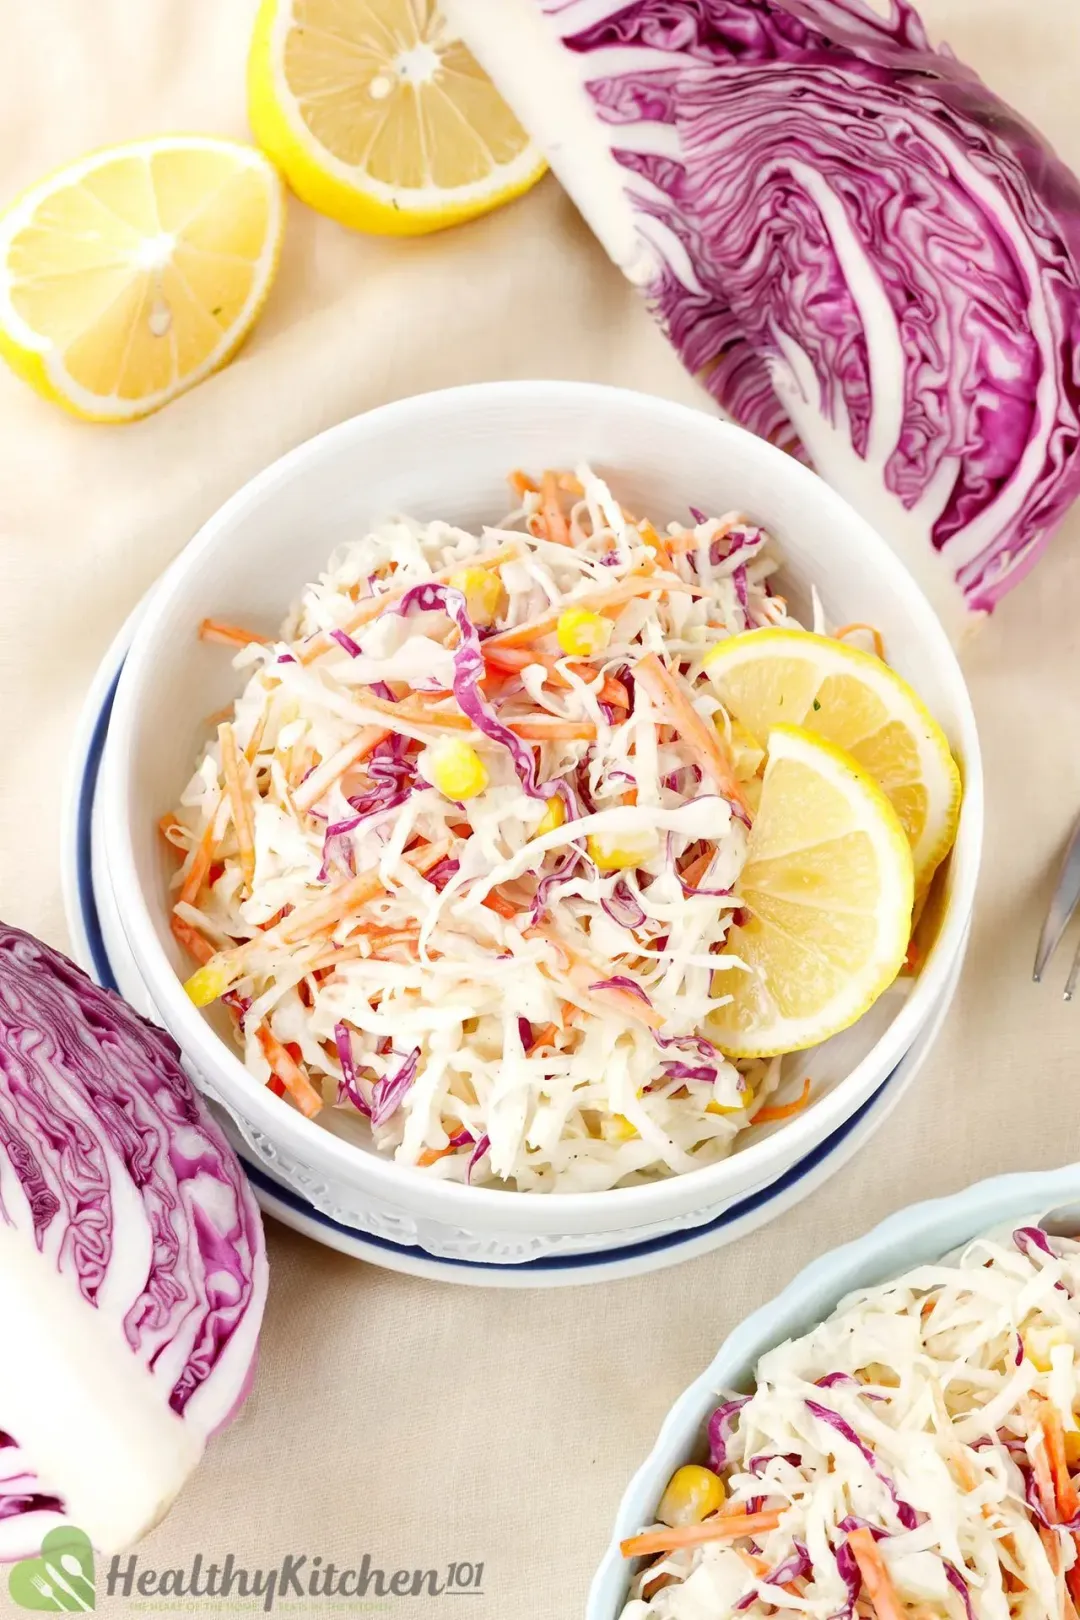 what to eat with coleslaw